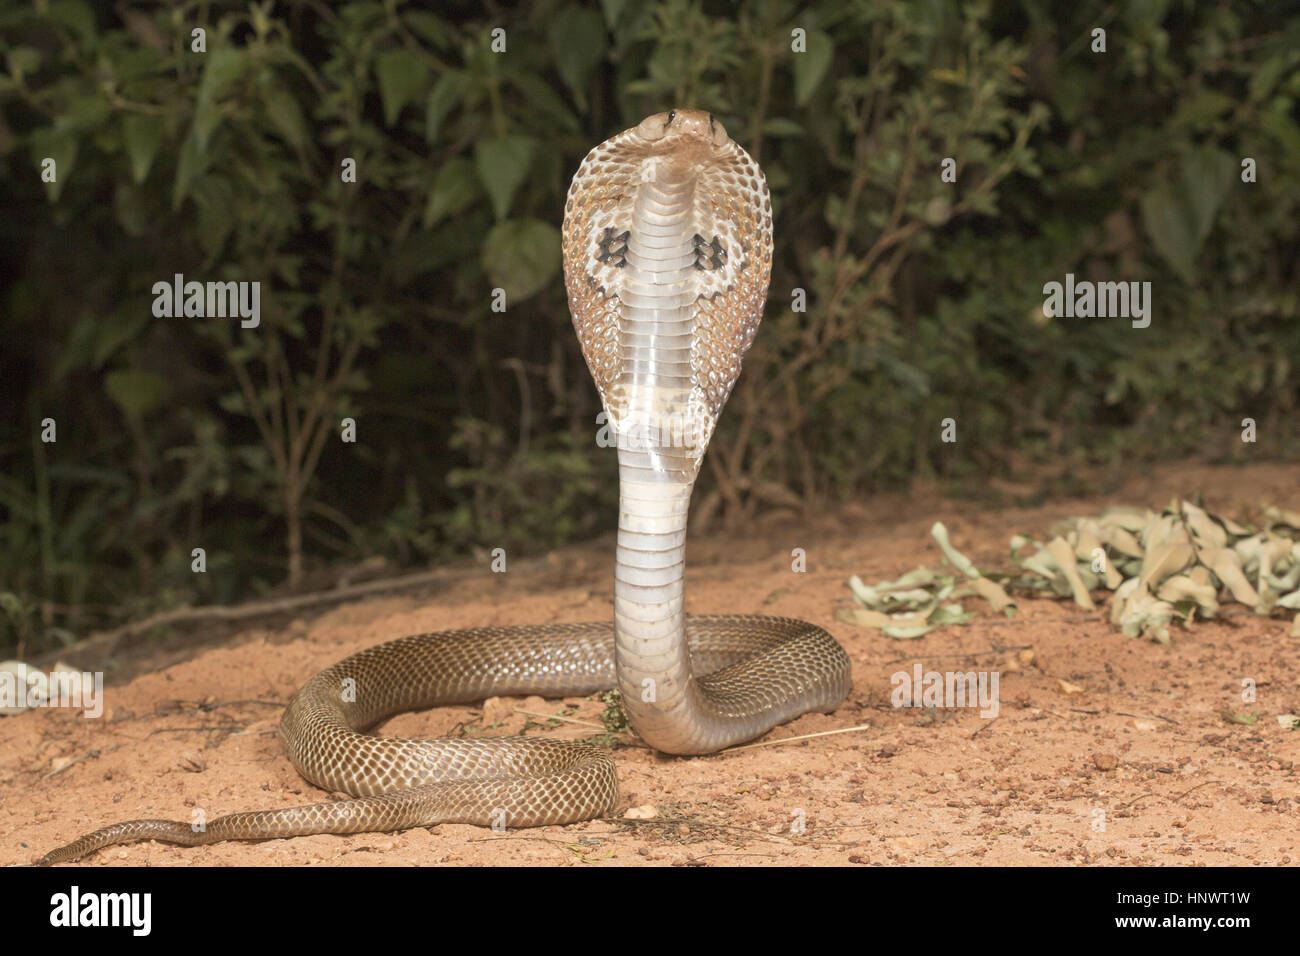 Spectacled cobra, Naja naja, Bangalore, Karnataka. The Indian cobra is one the big four venomous species that inflict the most snakebites on humans in Stock Photo